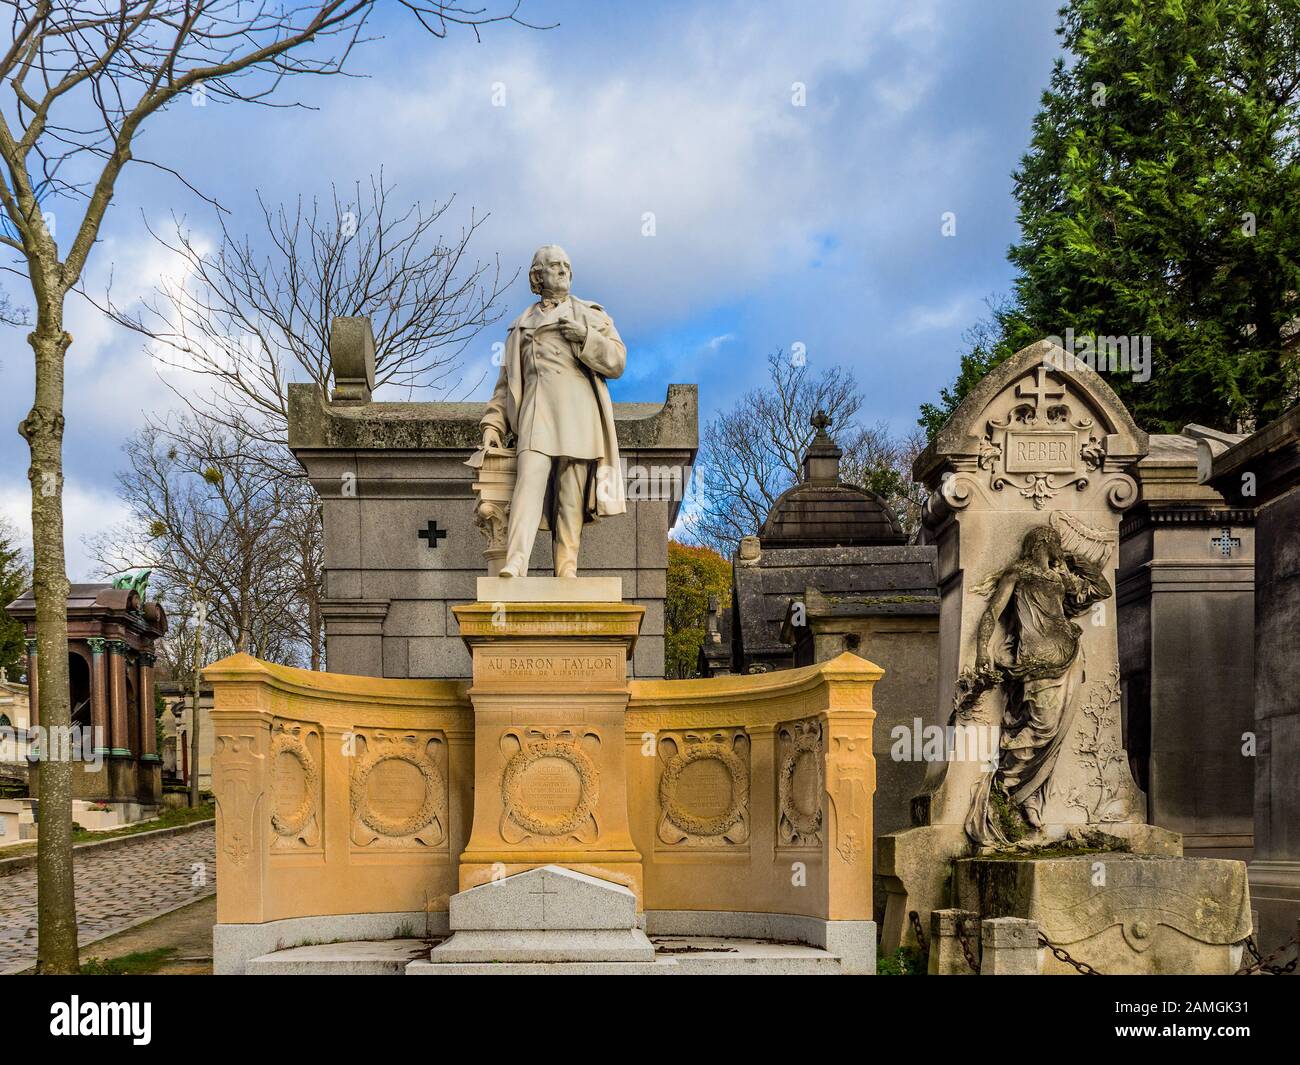 Ornate memorial tomb of Baron Taylor in the Père Lachaise Cemetery, Paris 75020, France. Stock Photo